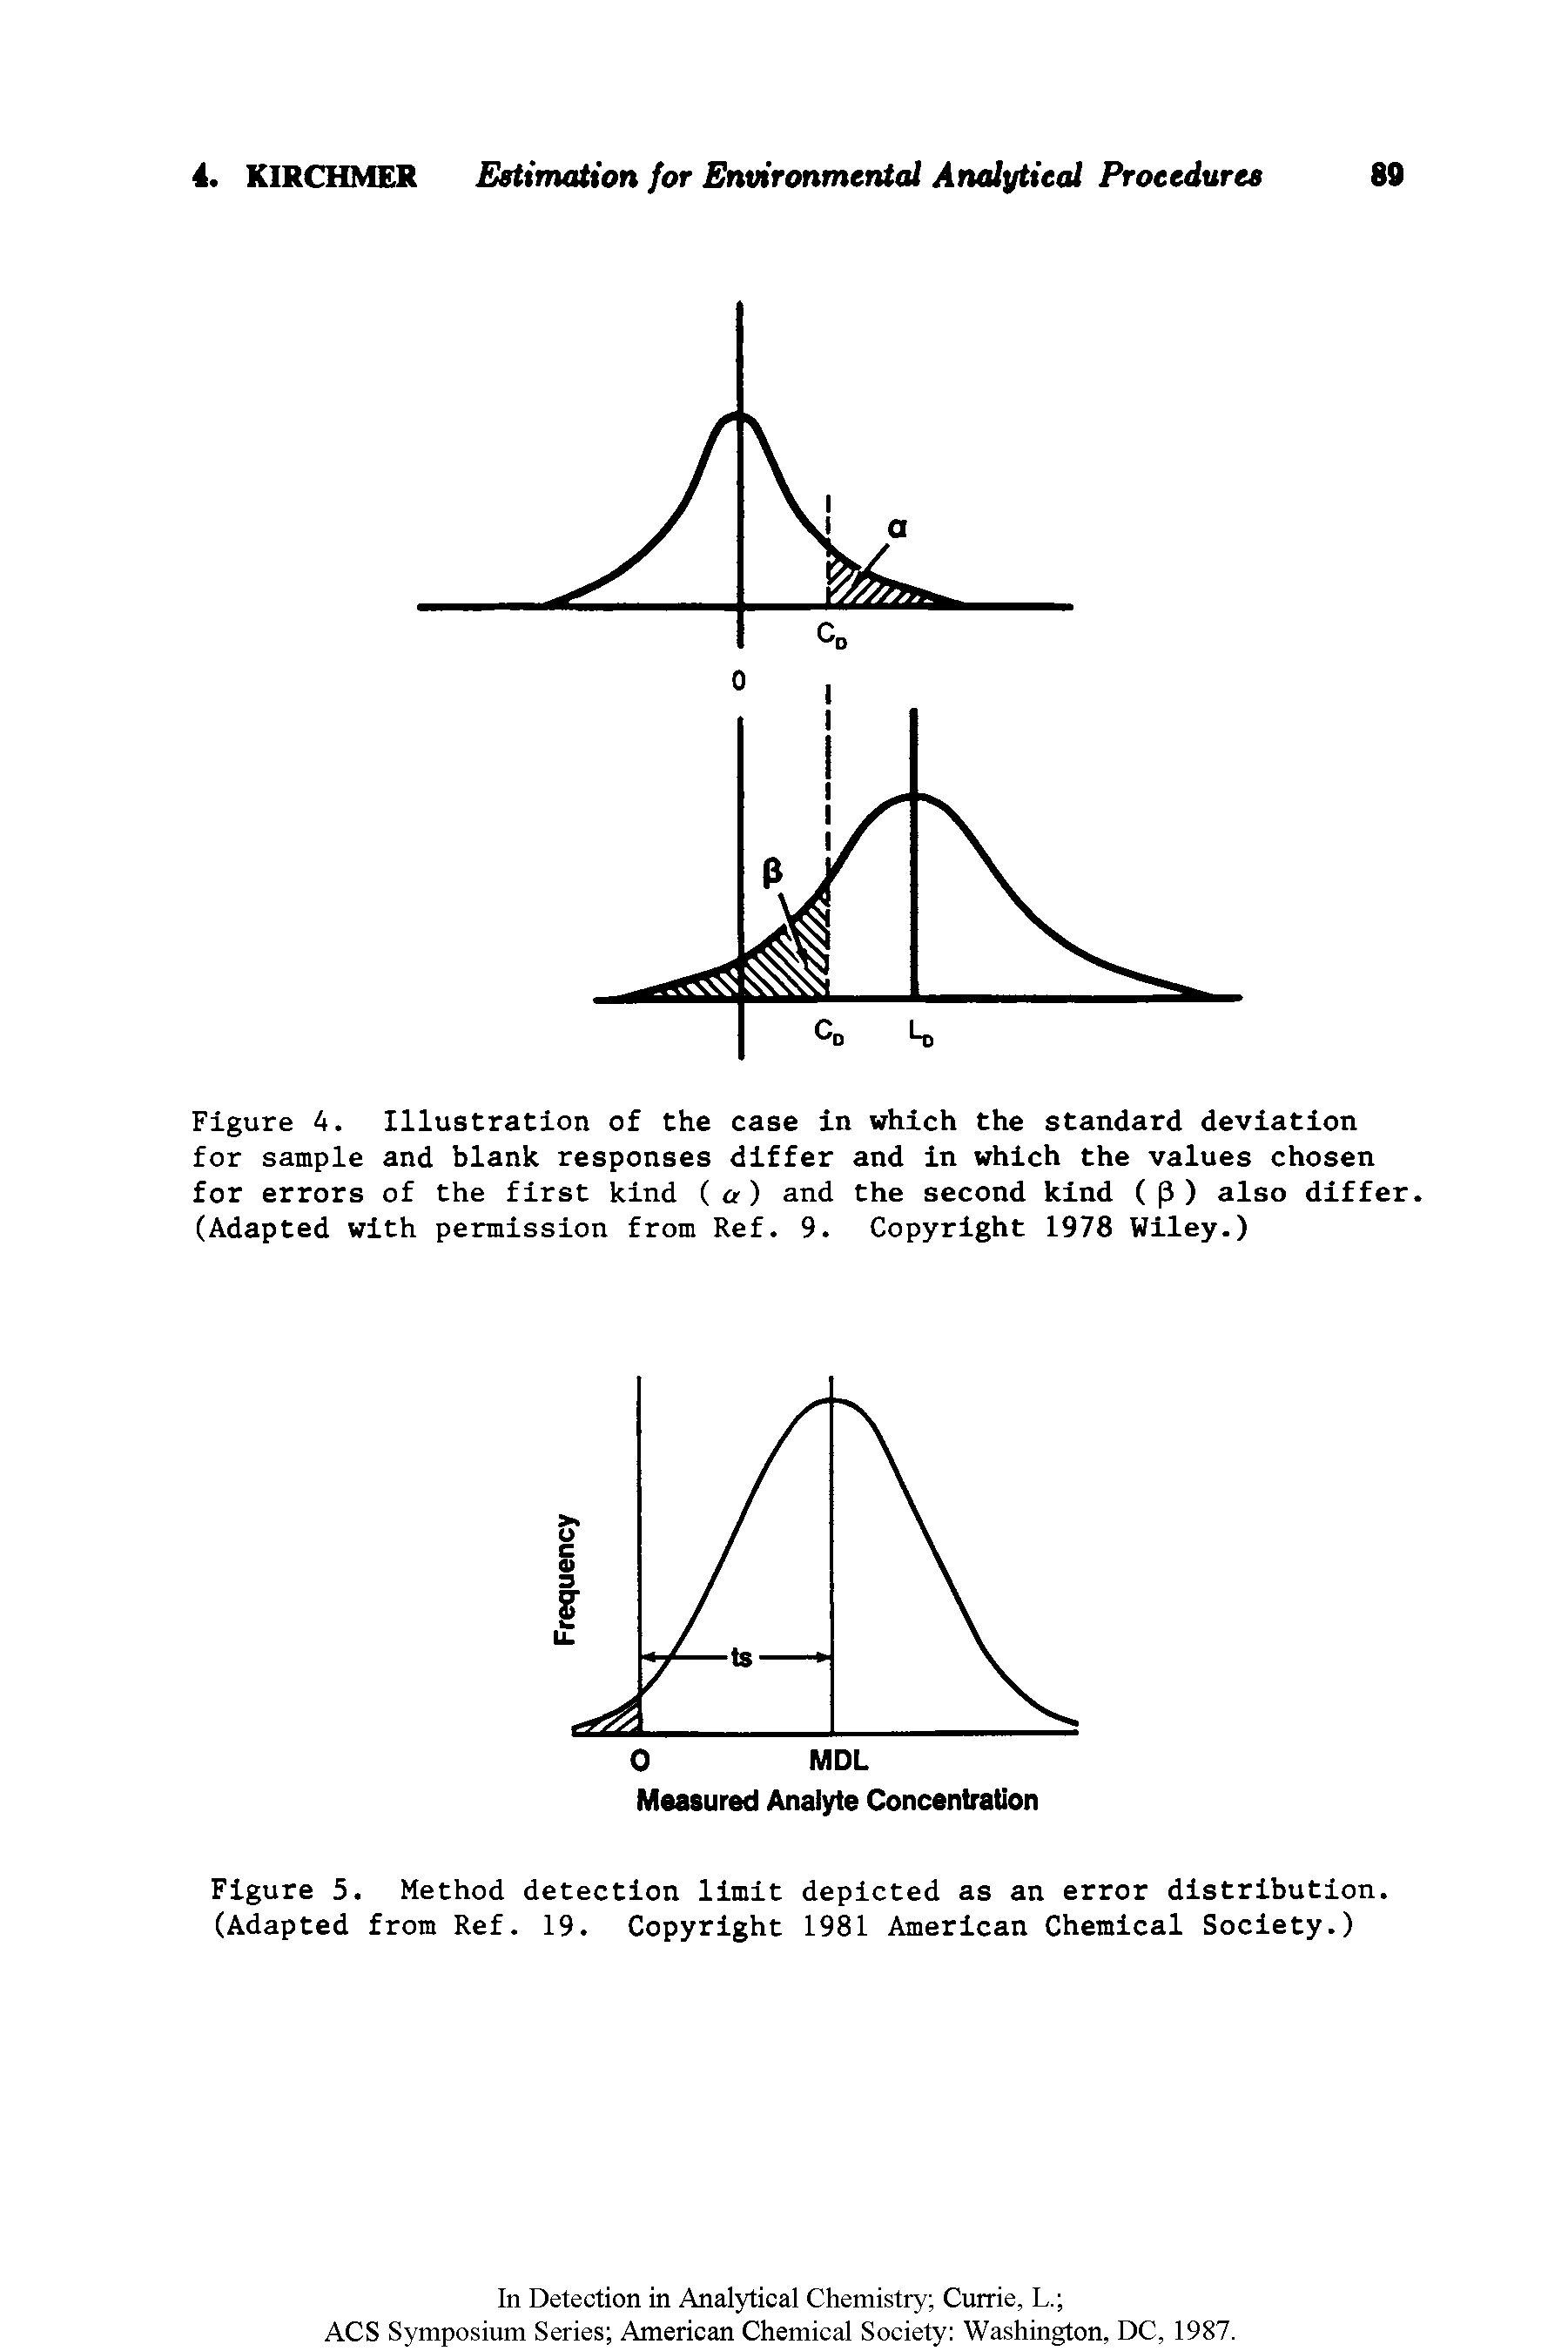 Figure 4. Illustration of the case In which the standard deviation for sample and blank responses differ and In which the values chosen for errors of the first kind (.a) and the second kind (p) also differ. (Adapted with permission from Ref. 9. Copyright 1978 Wiley.)...